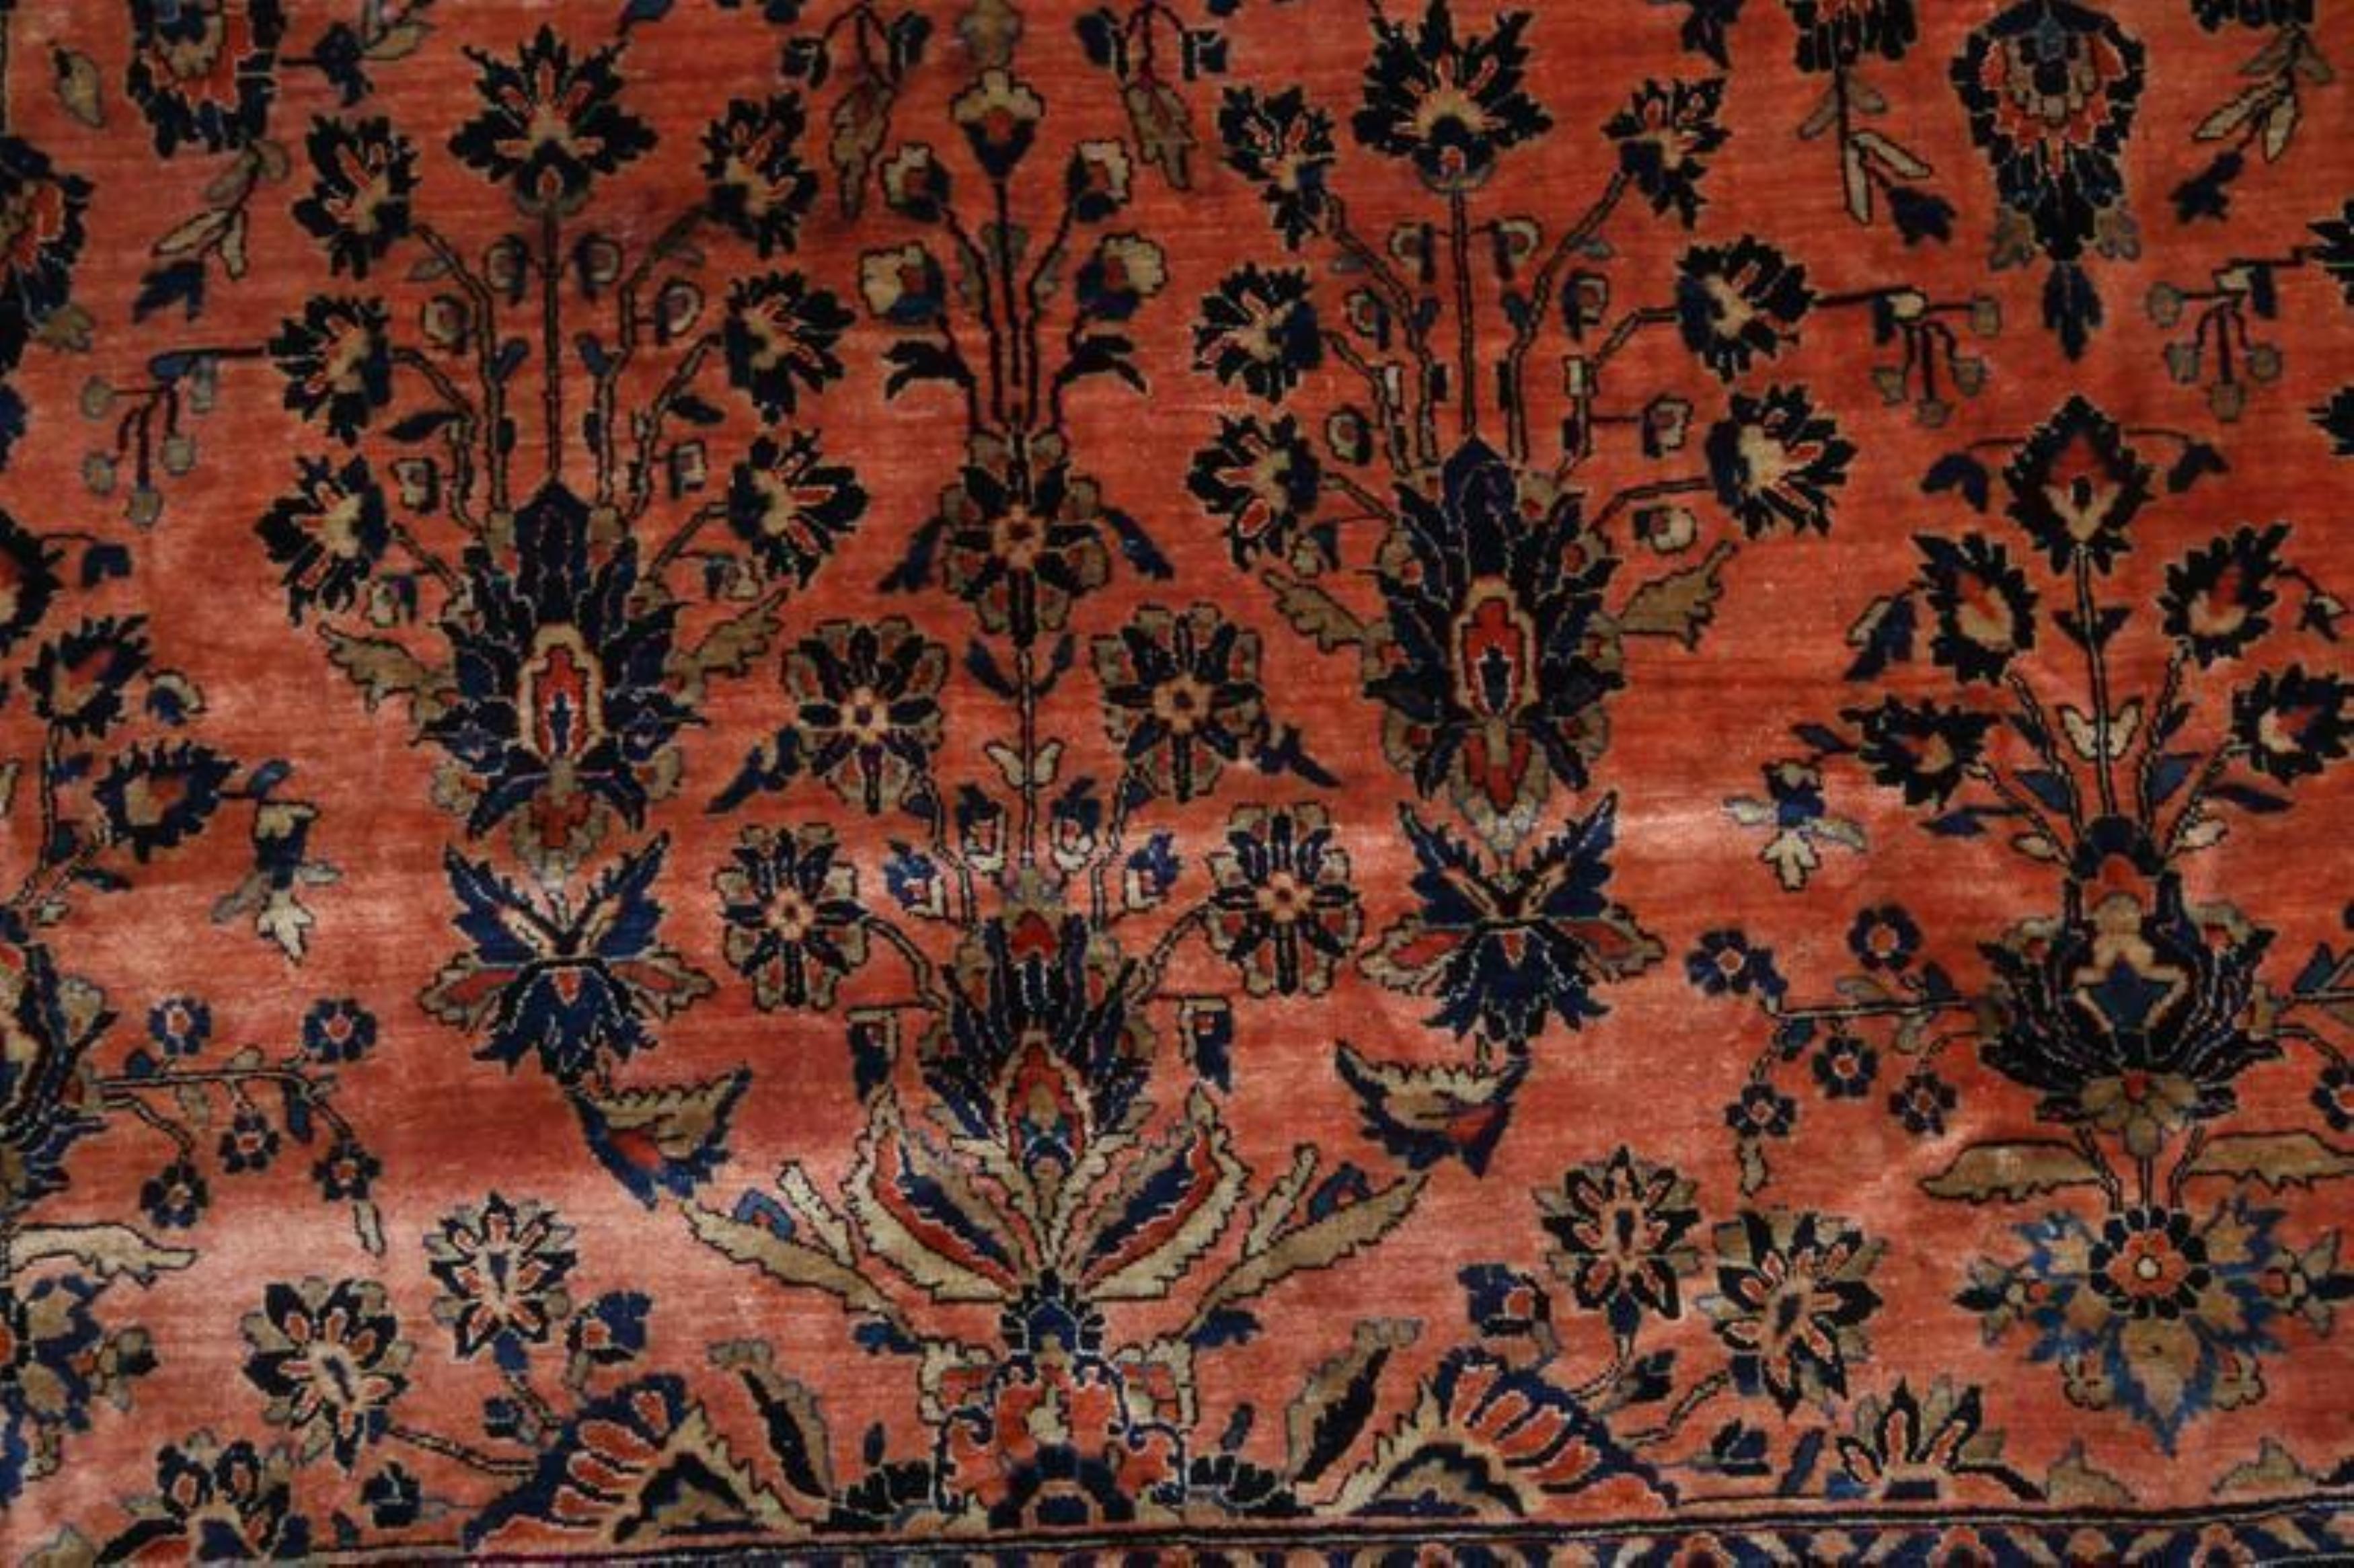 Hand-Knotted Antique Sarouk Persian Rug in Orange and Black Floral Pattern In Good Condition For Sale In Long Island City, NY